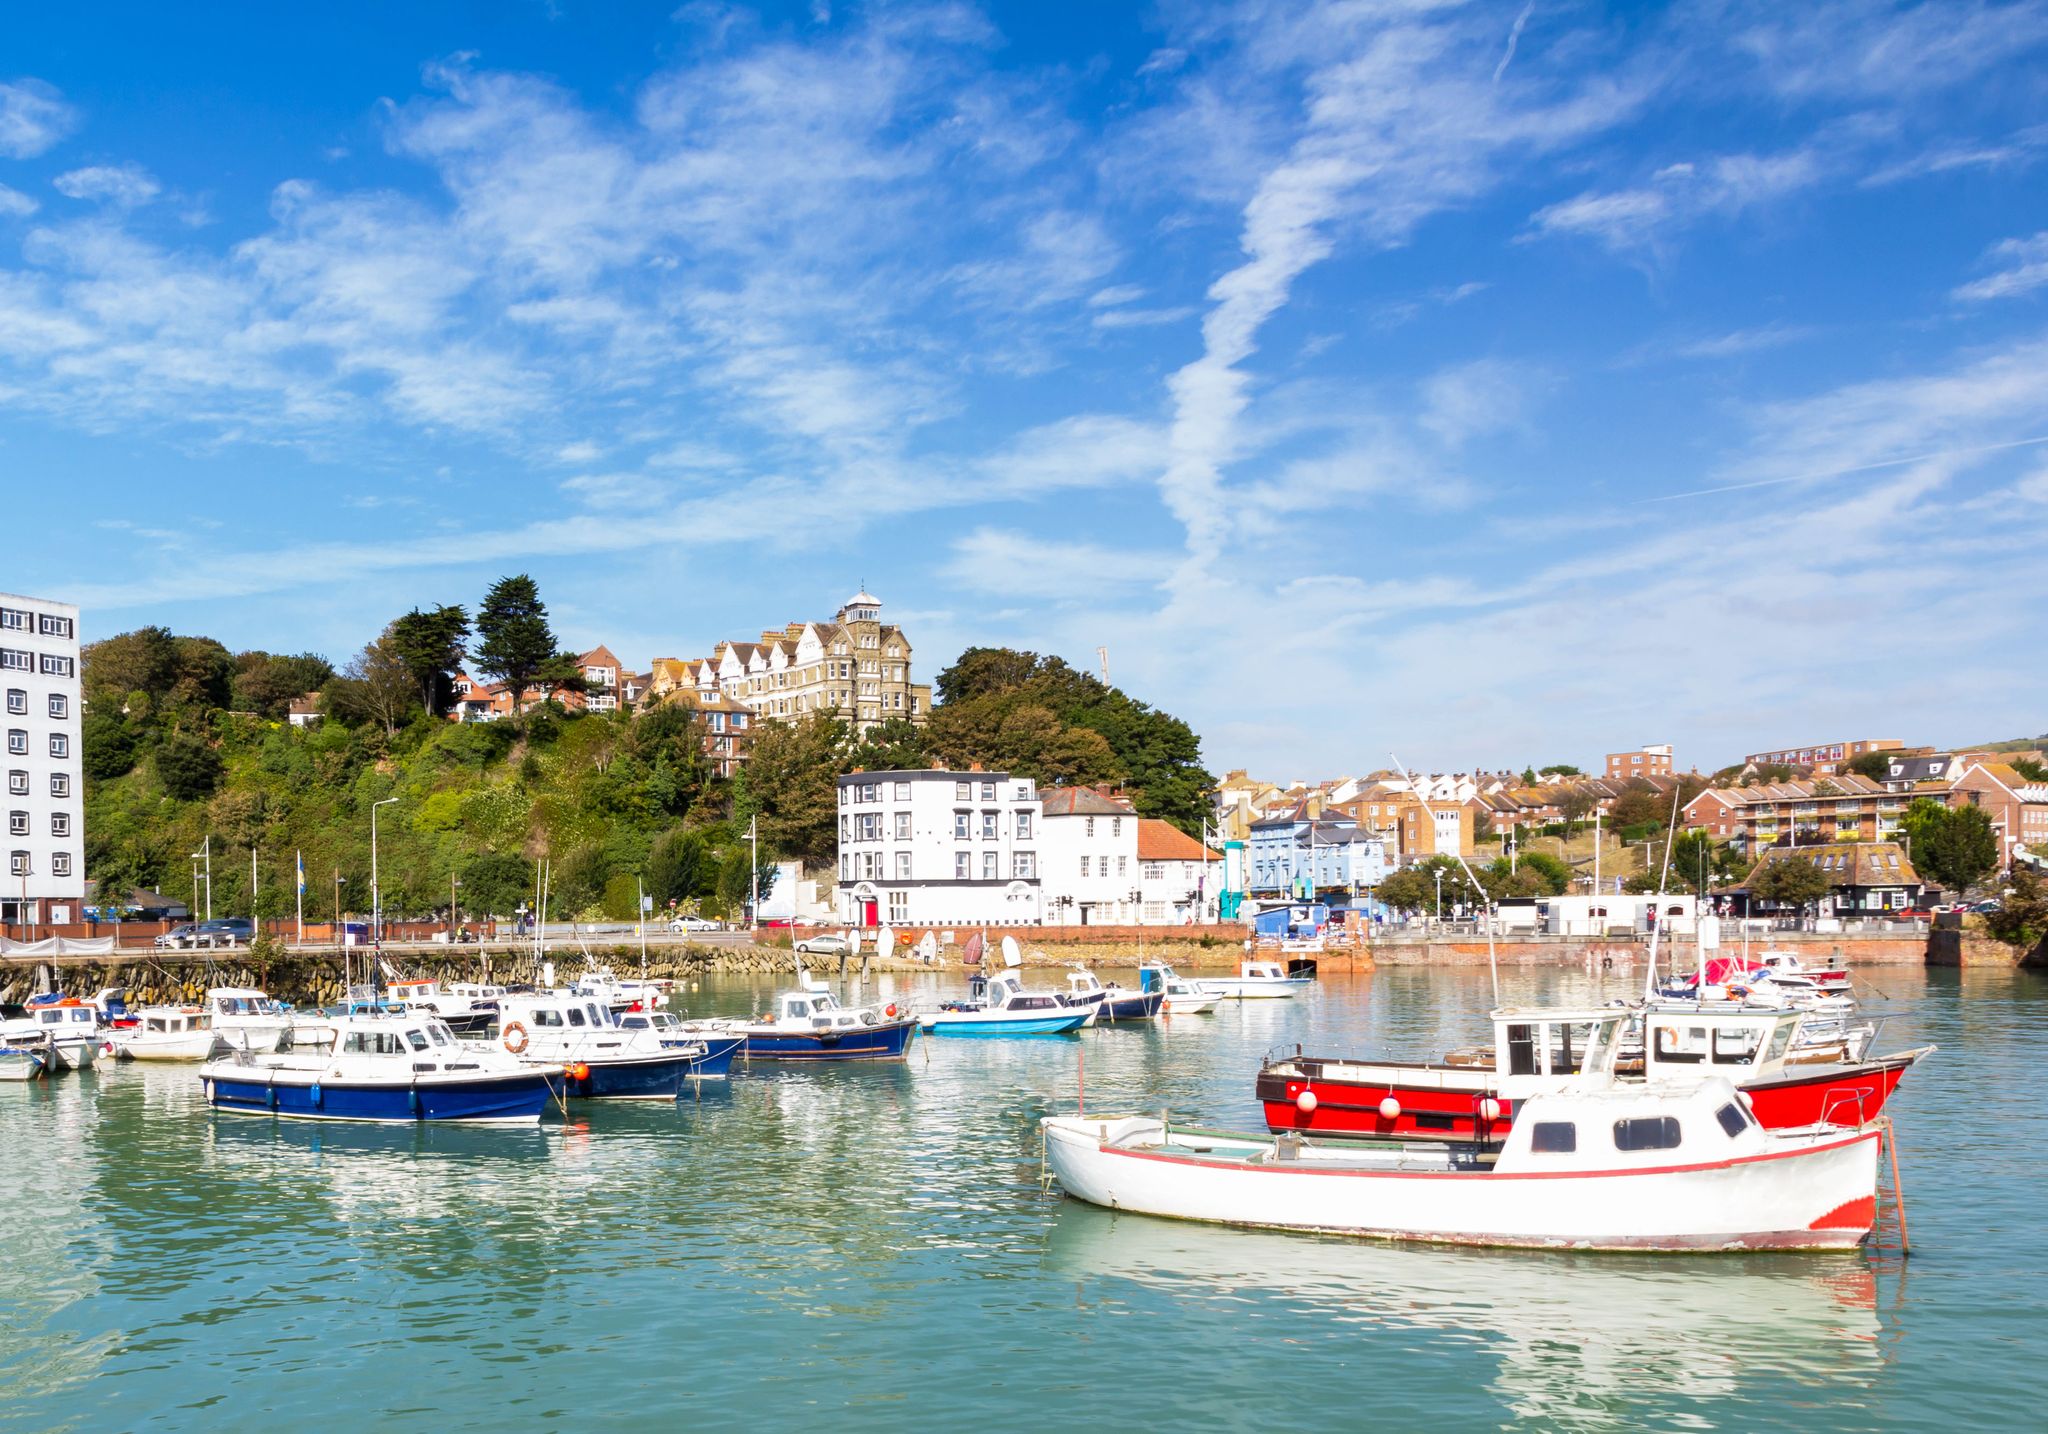 Folkestone: what to see, eat and do in Kent's buzziest seaside town